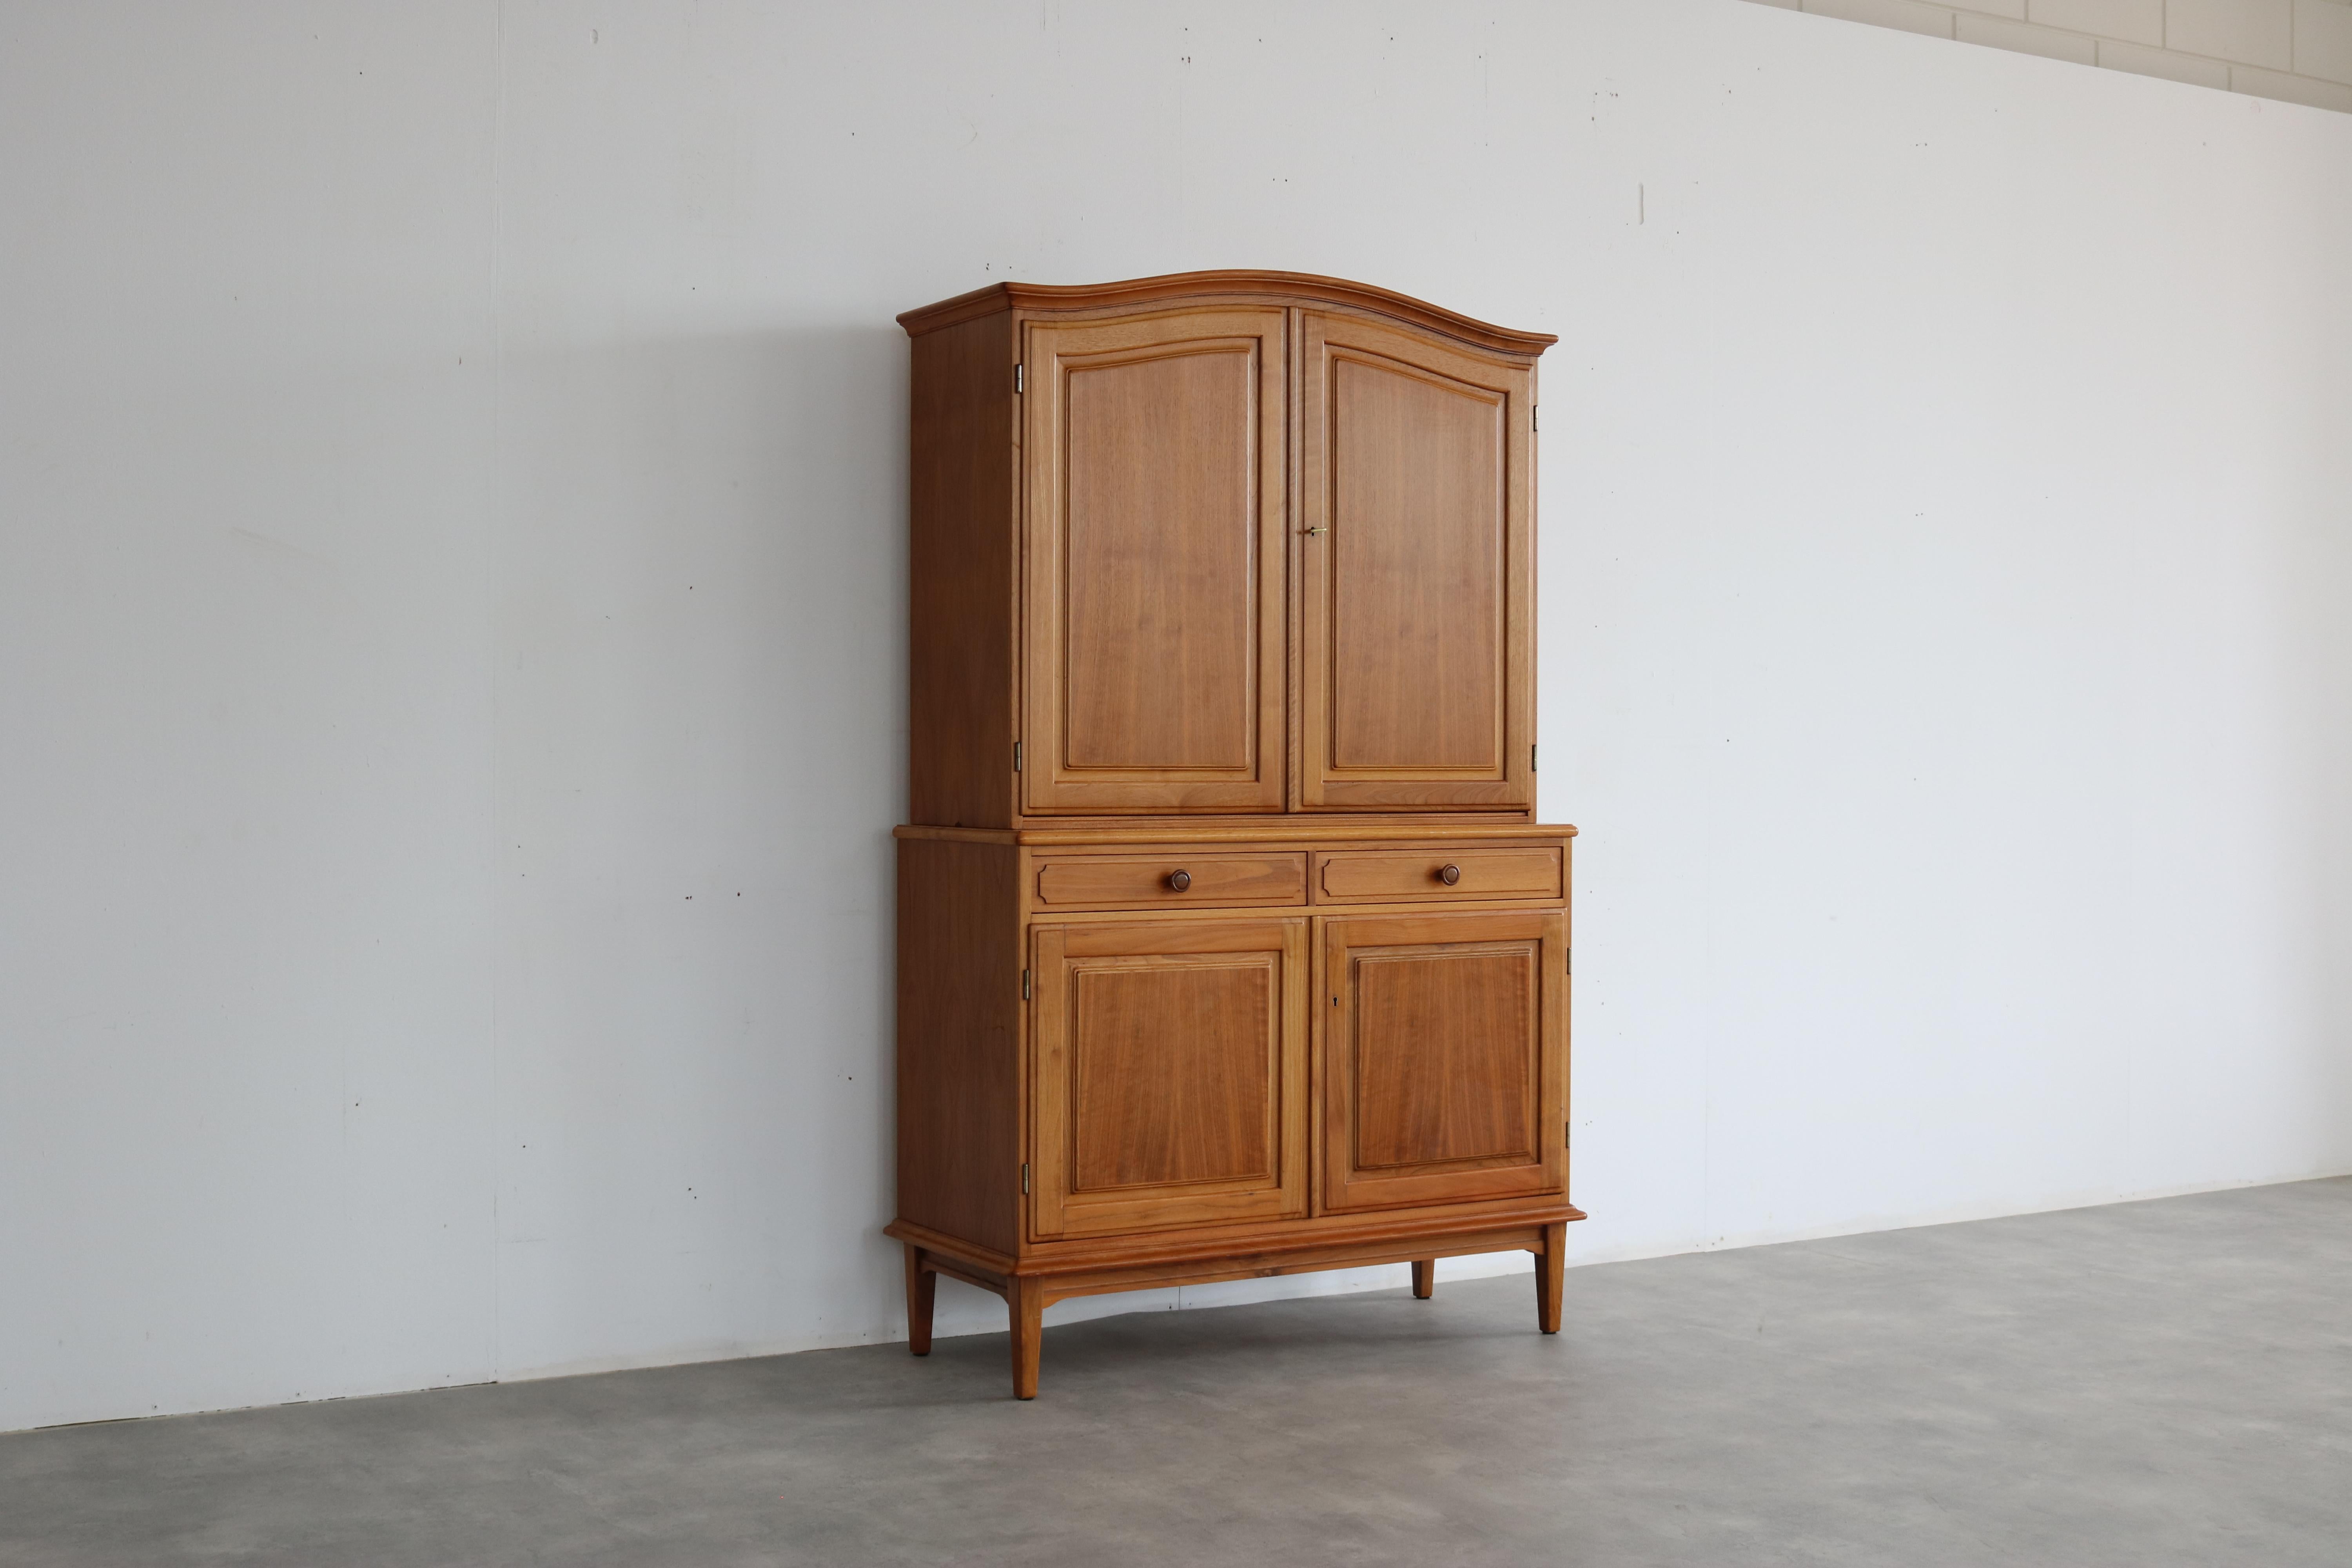  vintage sideboard | wall cupboard | 60s | Swedish In Good Condition For Sale In GRONINGEN, NL